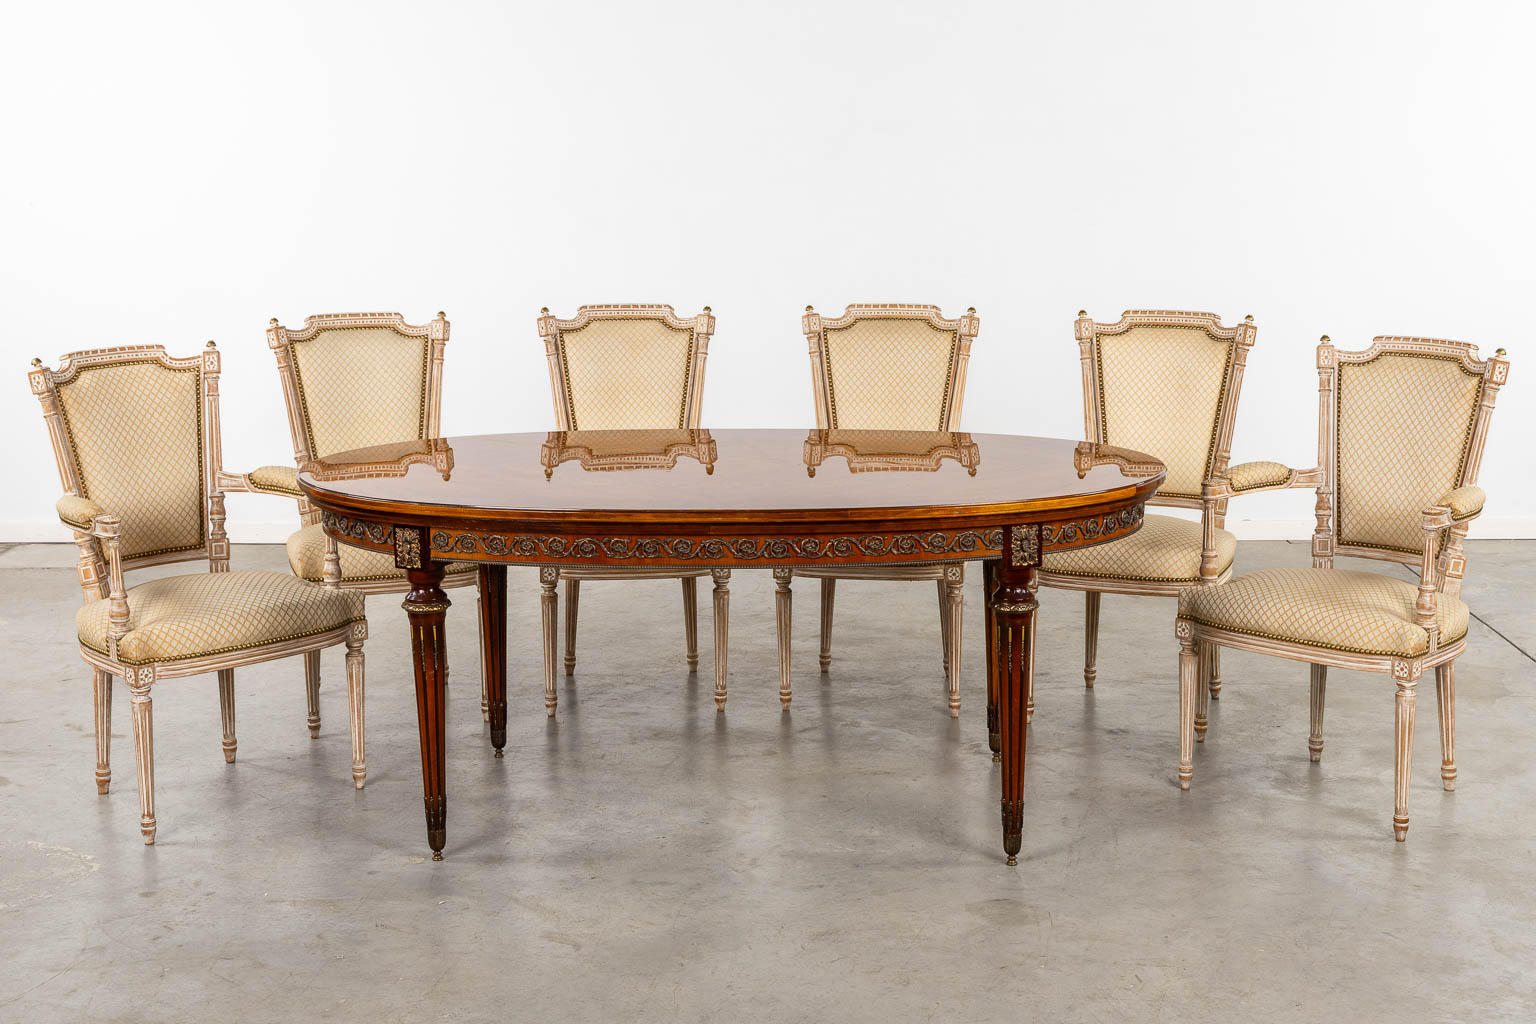 Ehalt, a 9-piece dining room set, 20th C. (L:58 x W:265 x H:100 cm) - Image 2 of 13